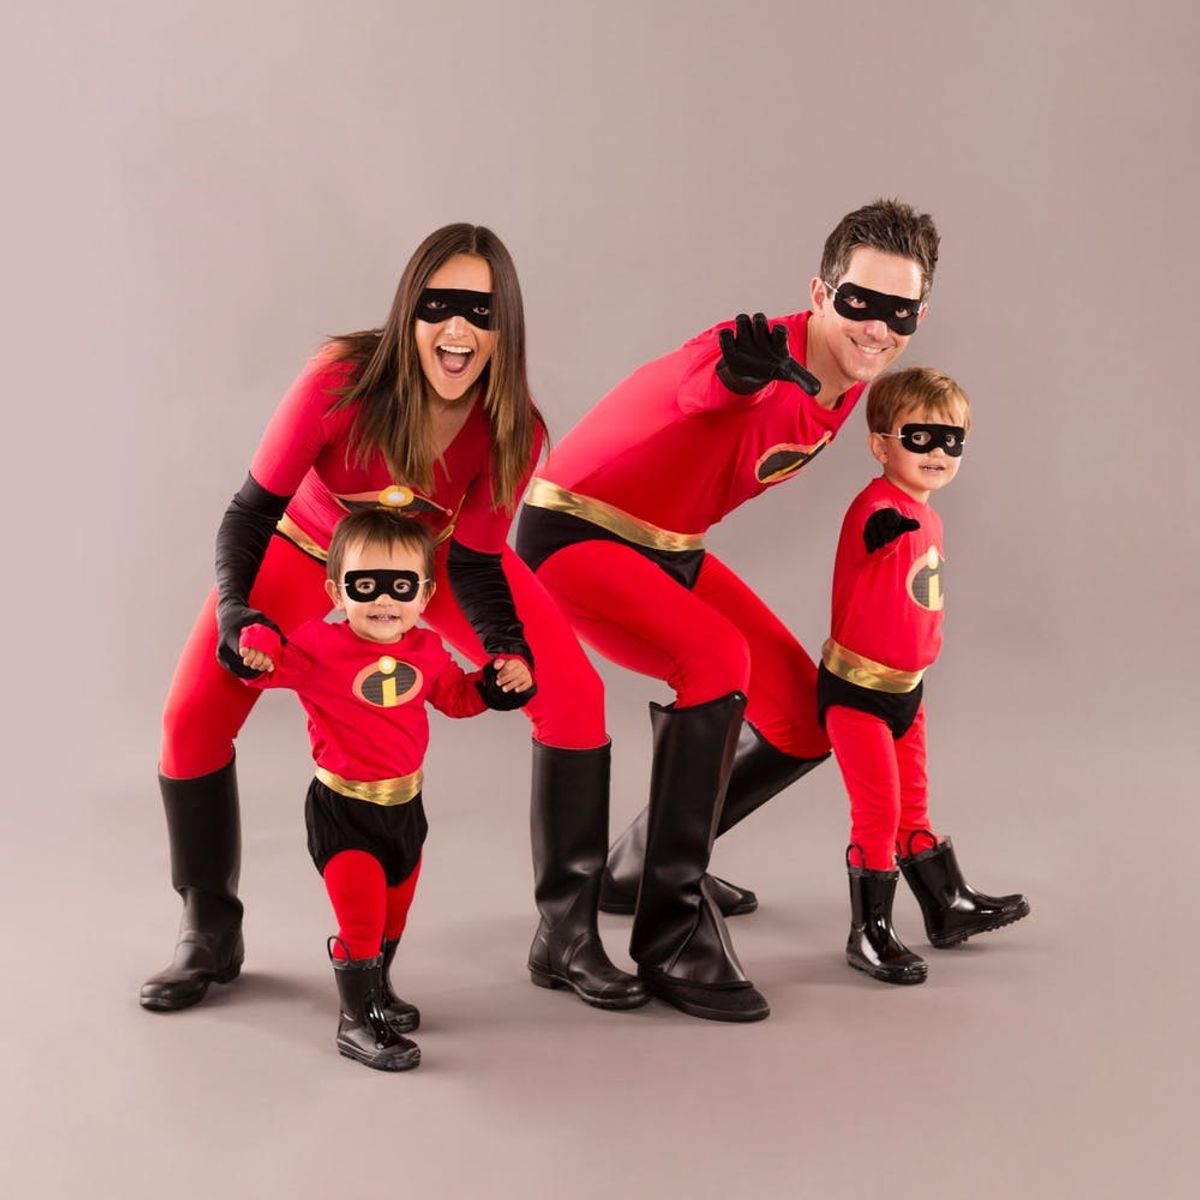 This Last-Minute ‘Incredibles’ Halloween Costume Is Family #Goals